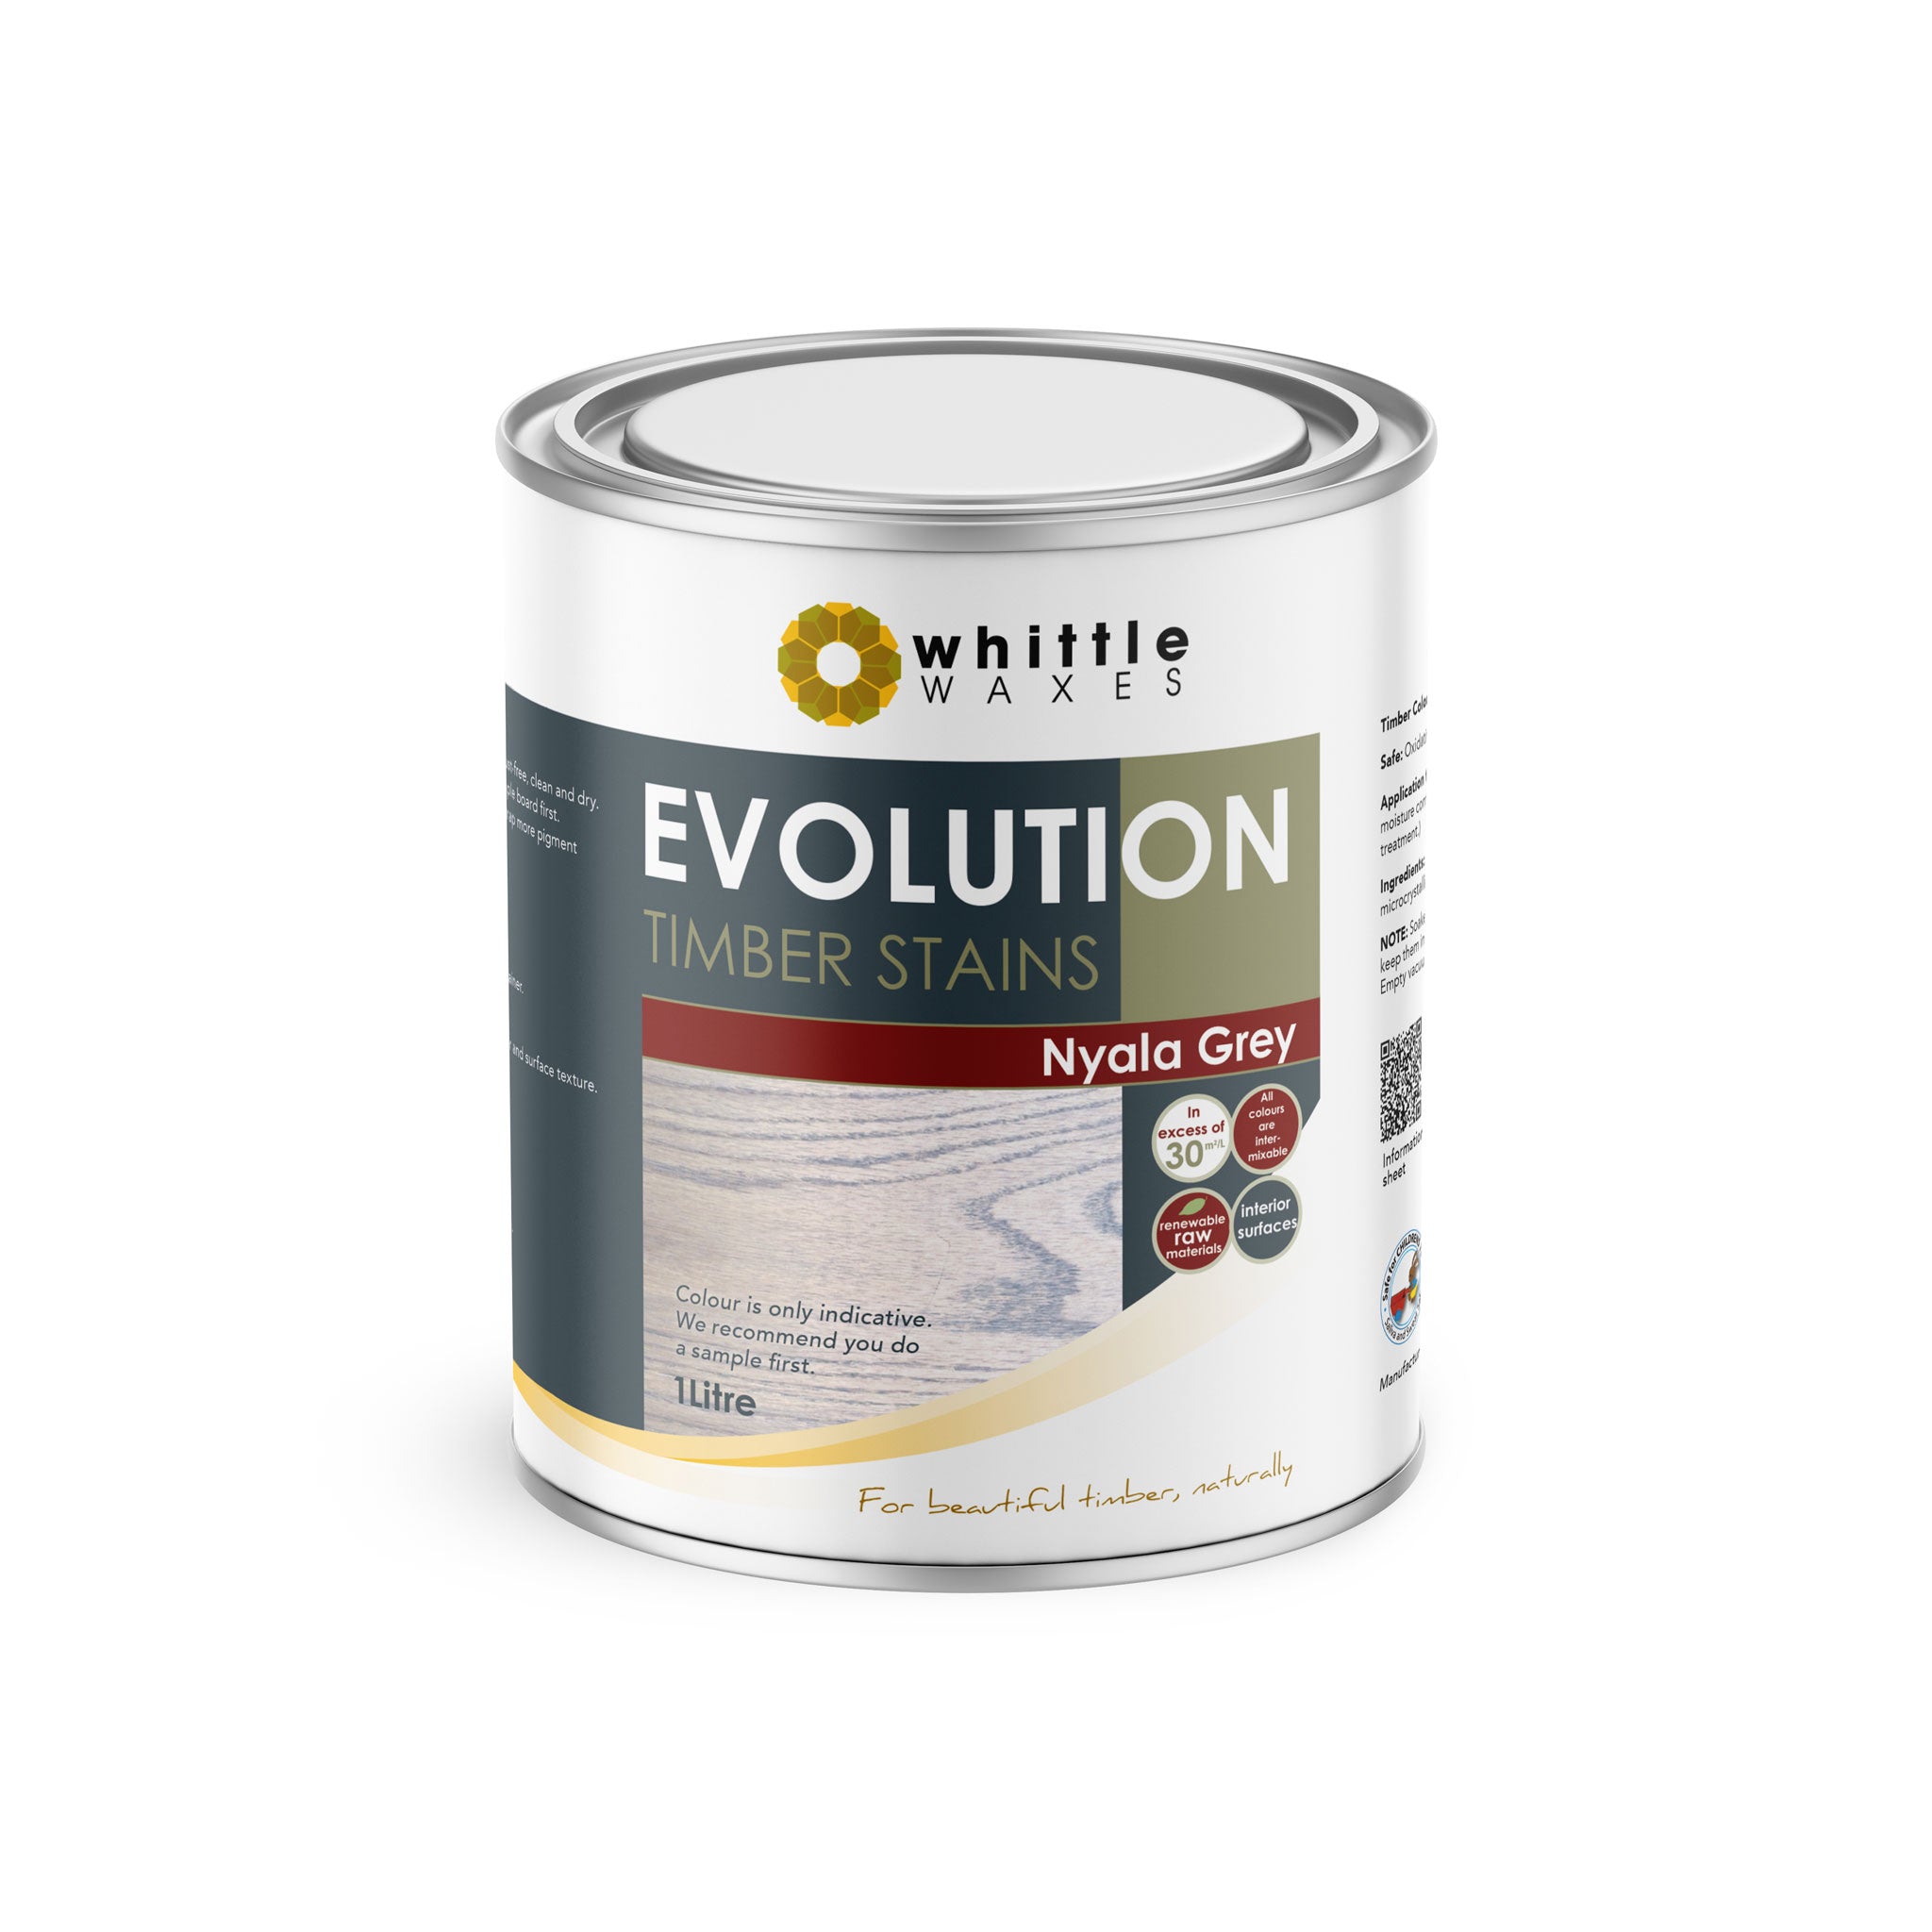 Whittle Waxes Evolution Colours (Nyala Grey) - quality timber stain - 1 Litre